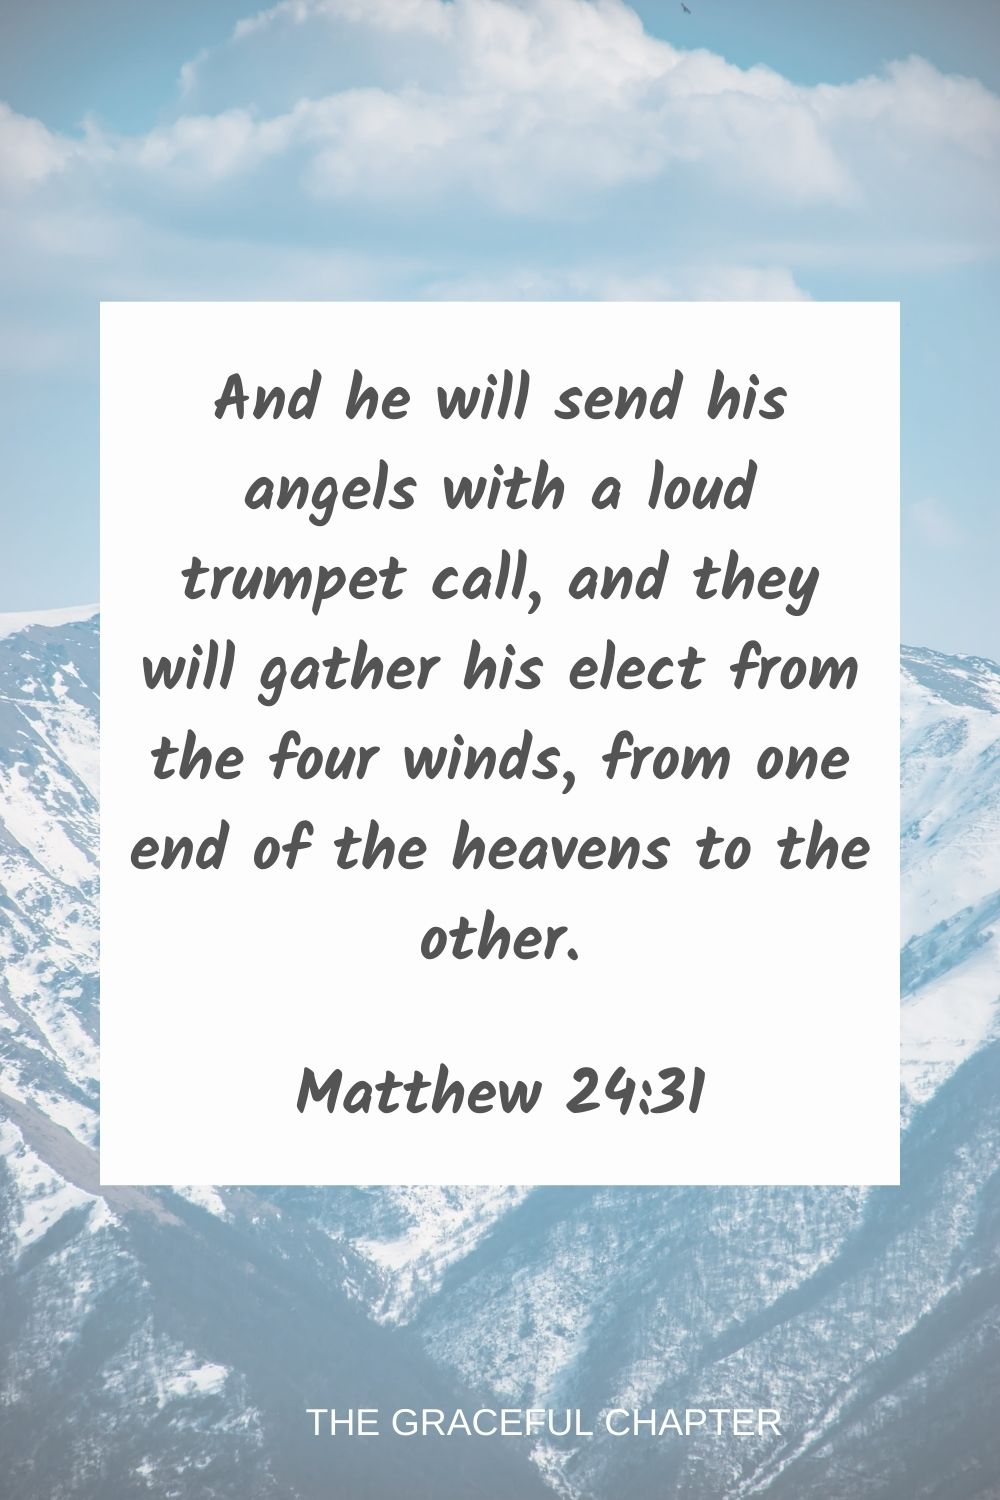 And he will send his angels with a loud trumpet call, and they will gather his elect from the four winds, from one end of the heavens to the other. Matthew 24:31